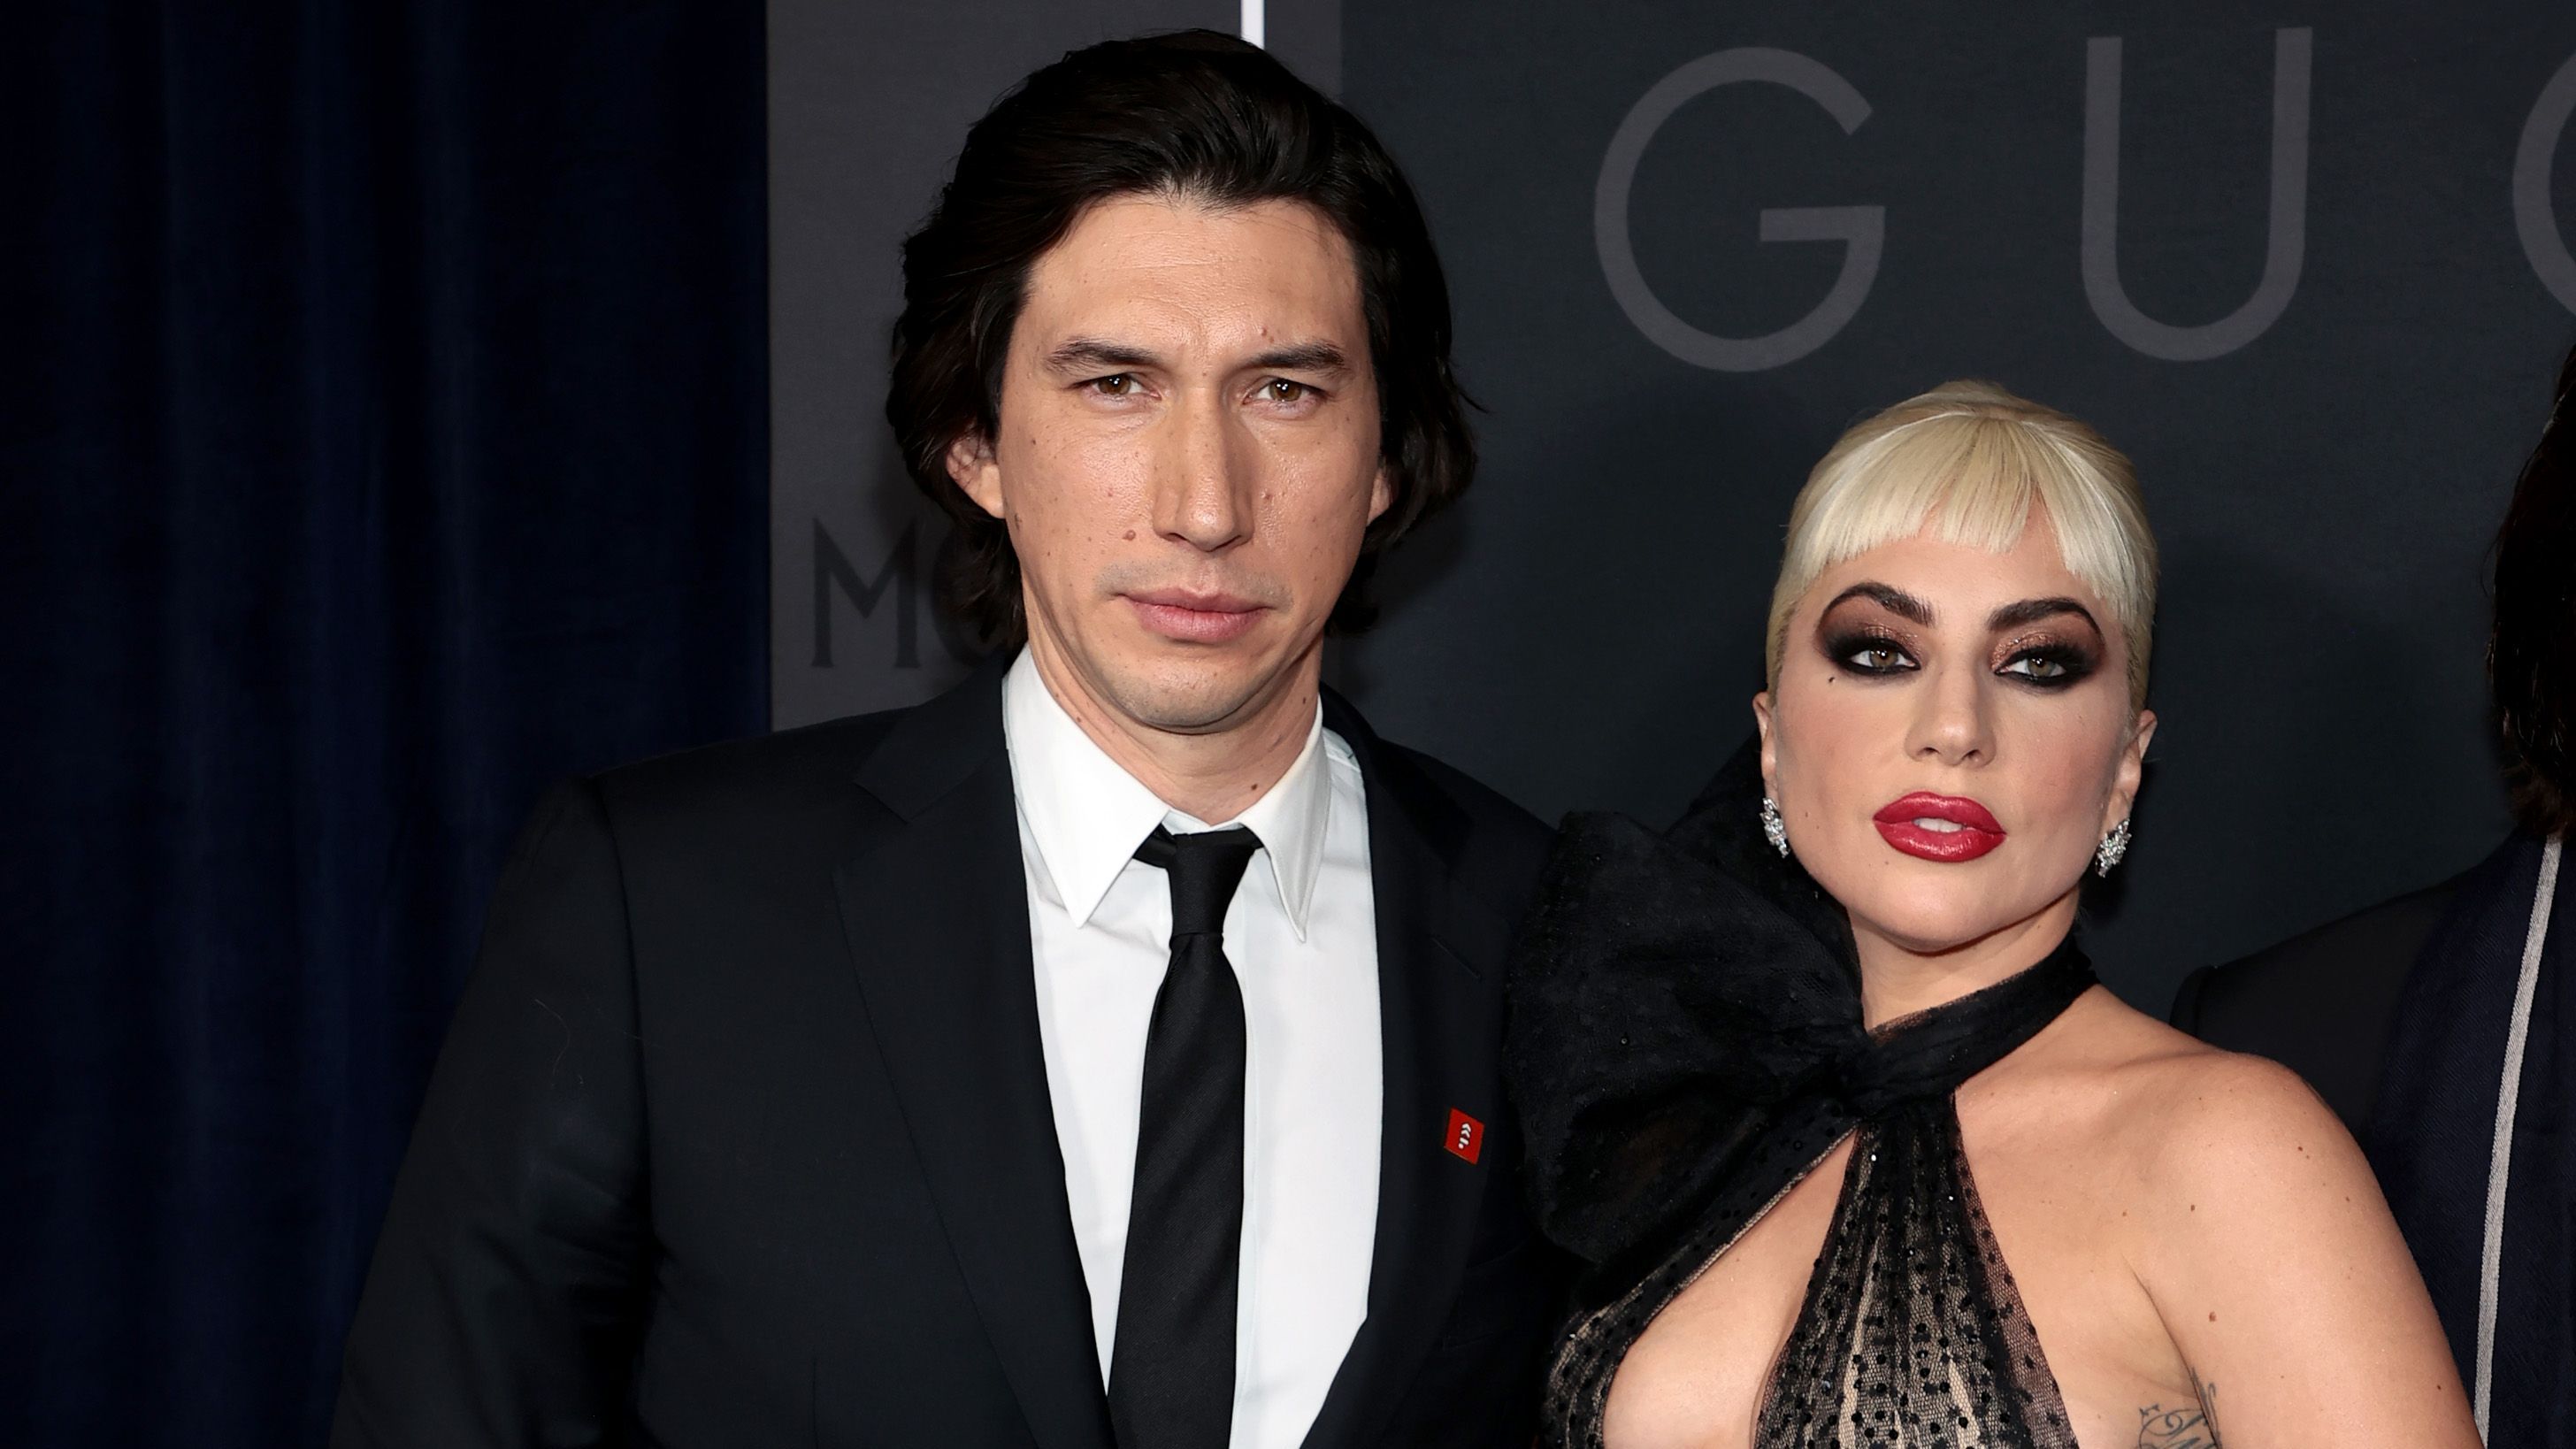 Naked Lady Gaga Having Sex - Adam Driver opens up about Lady Gaga sex scenes in House of Gucci